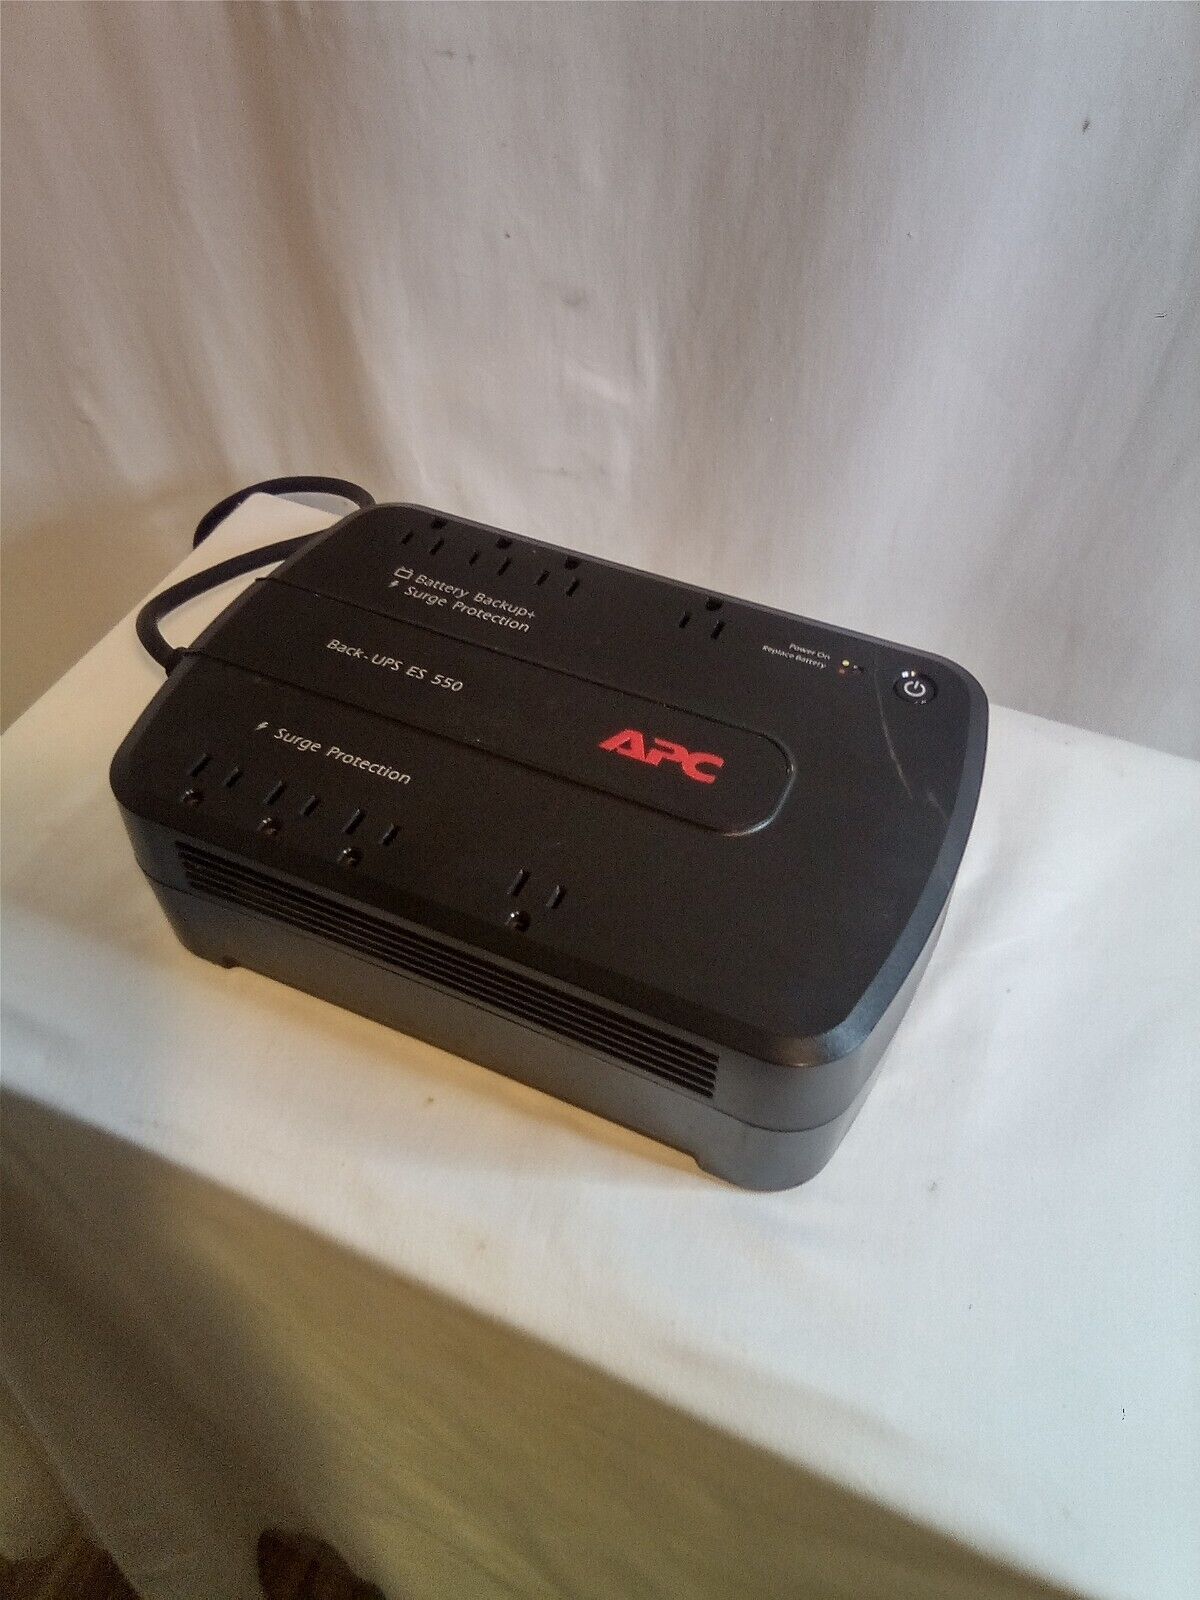 APC Back-UPS ES 550 Surge Protector 8 Outlet 550VA WITH BATTERY.. Works Great